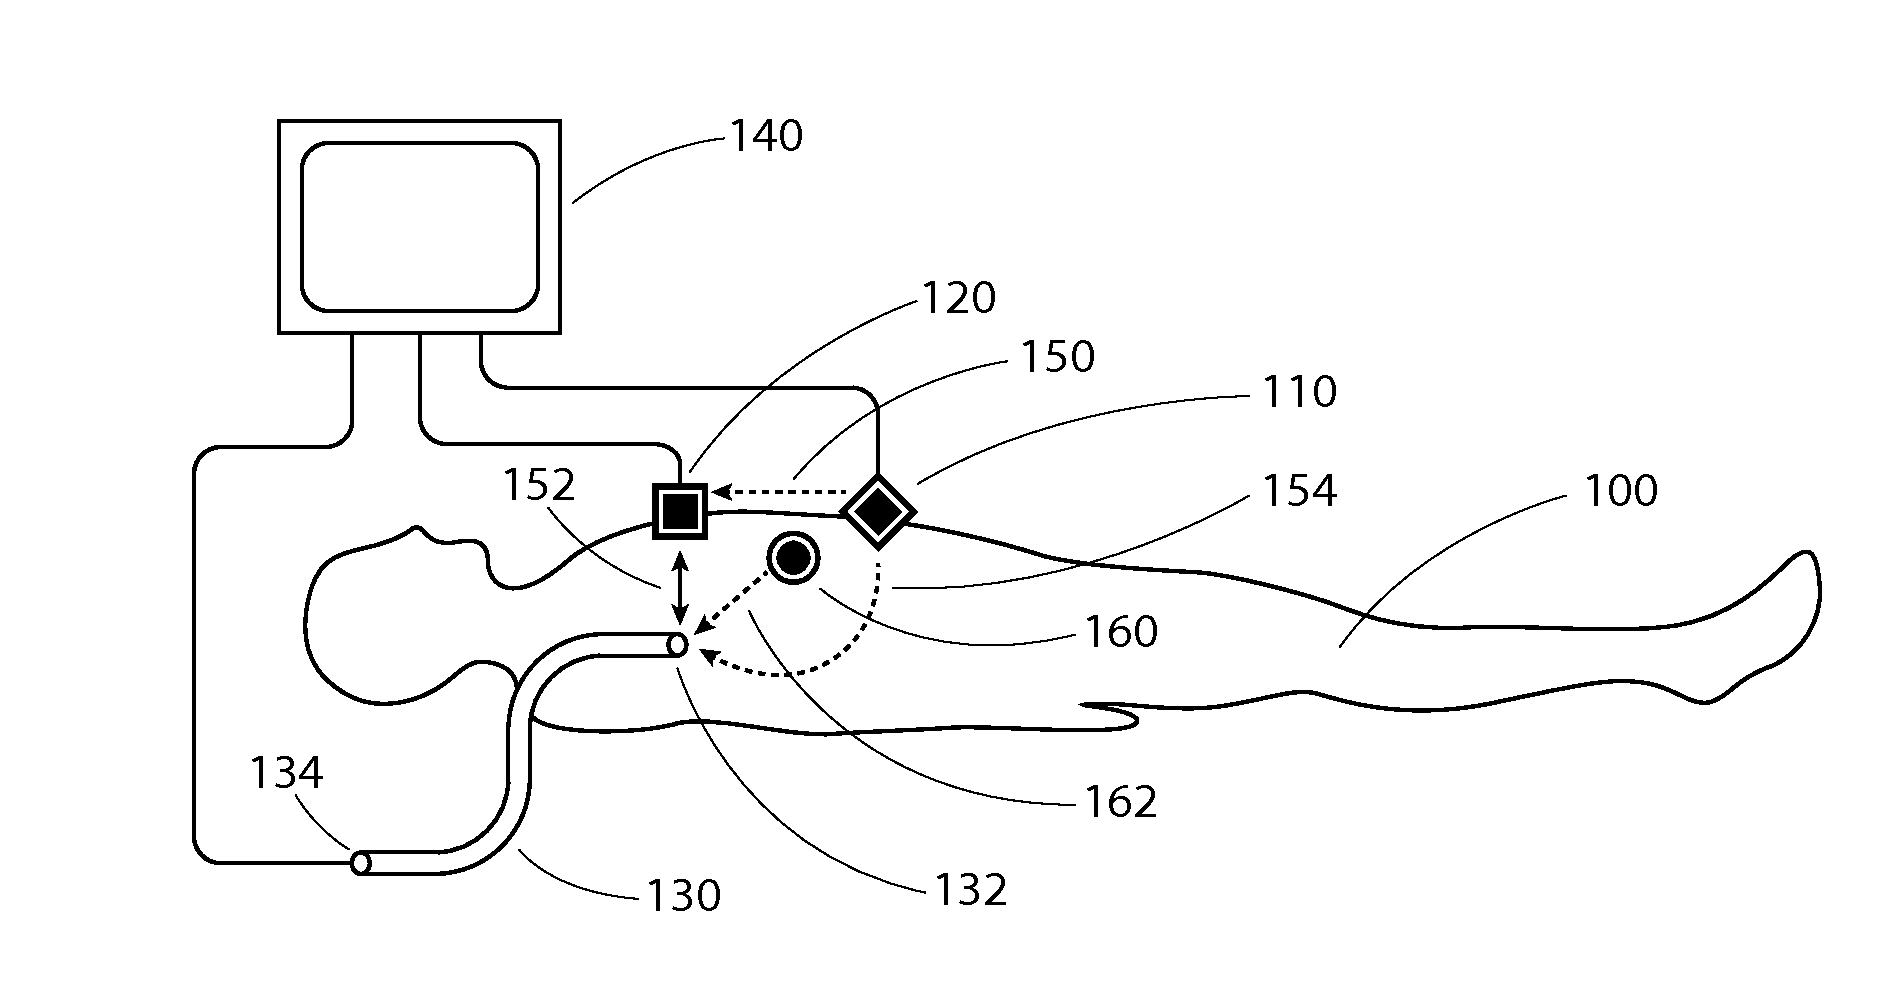 Apparatus and method for intravascular catheter navigation using the electrical conduction system of the heart and control electrodes